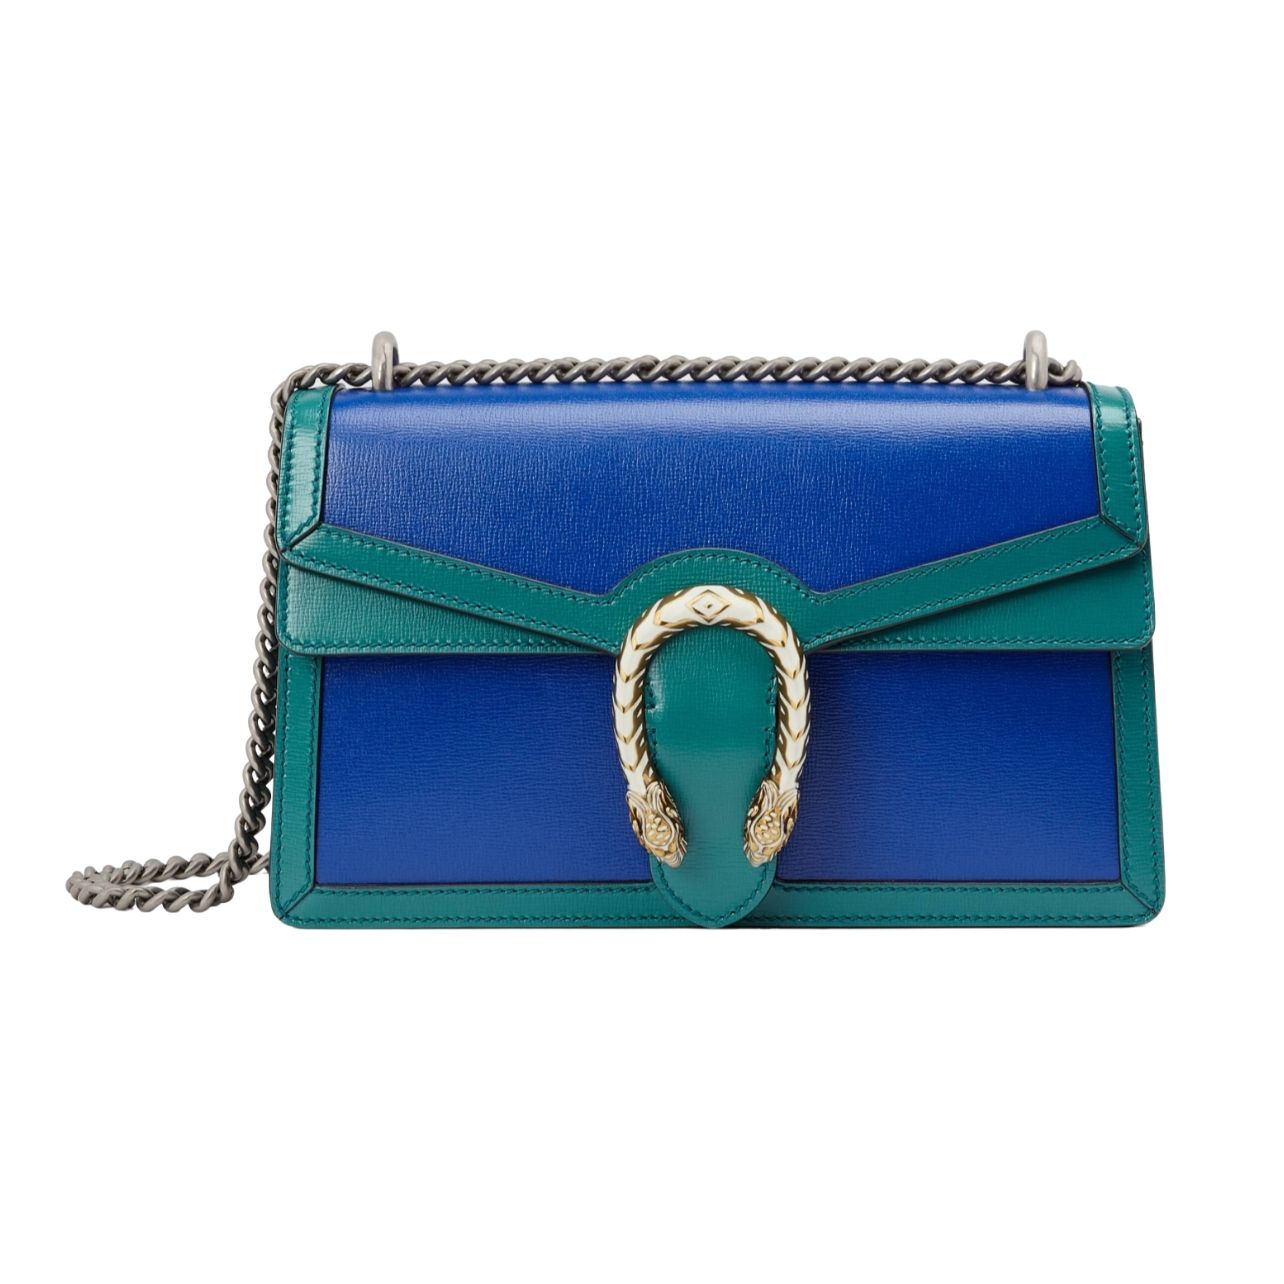 Blue and green Gucci bag